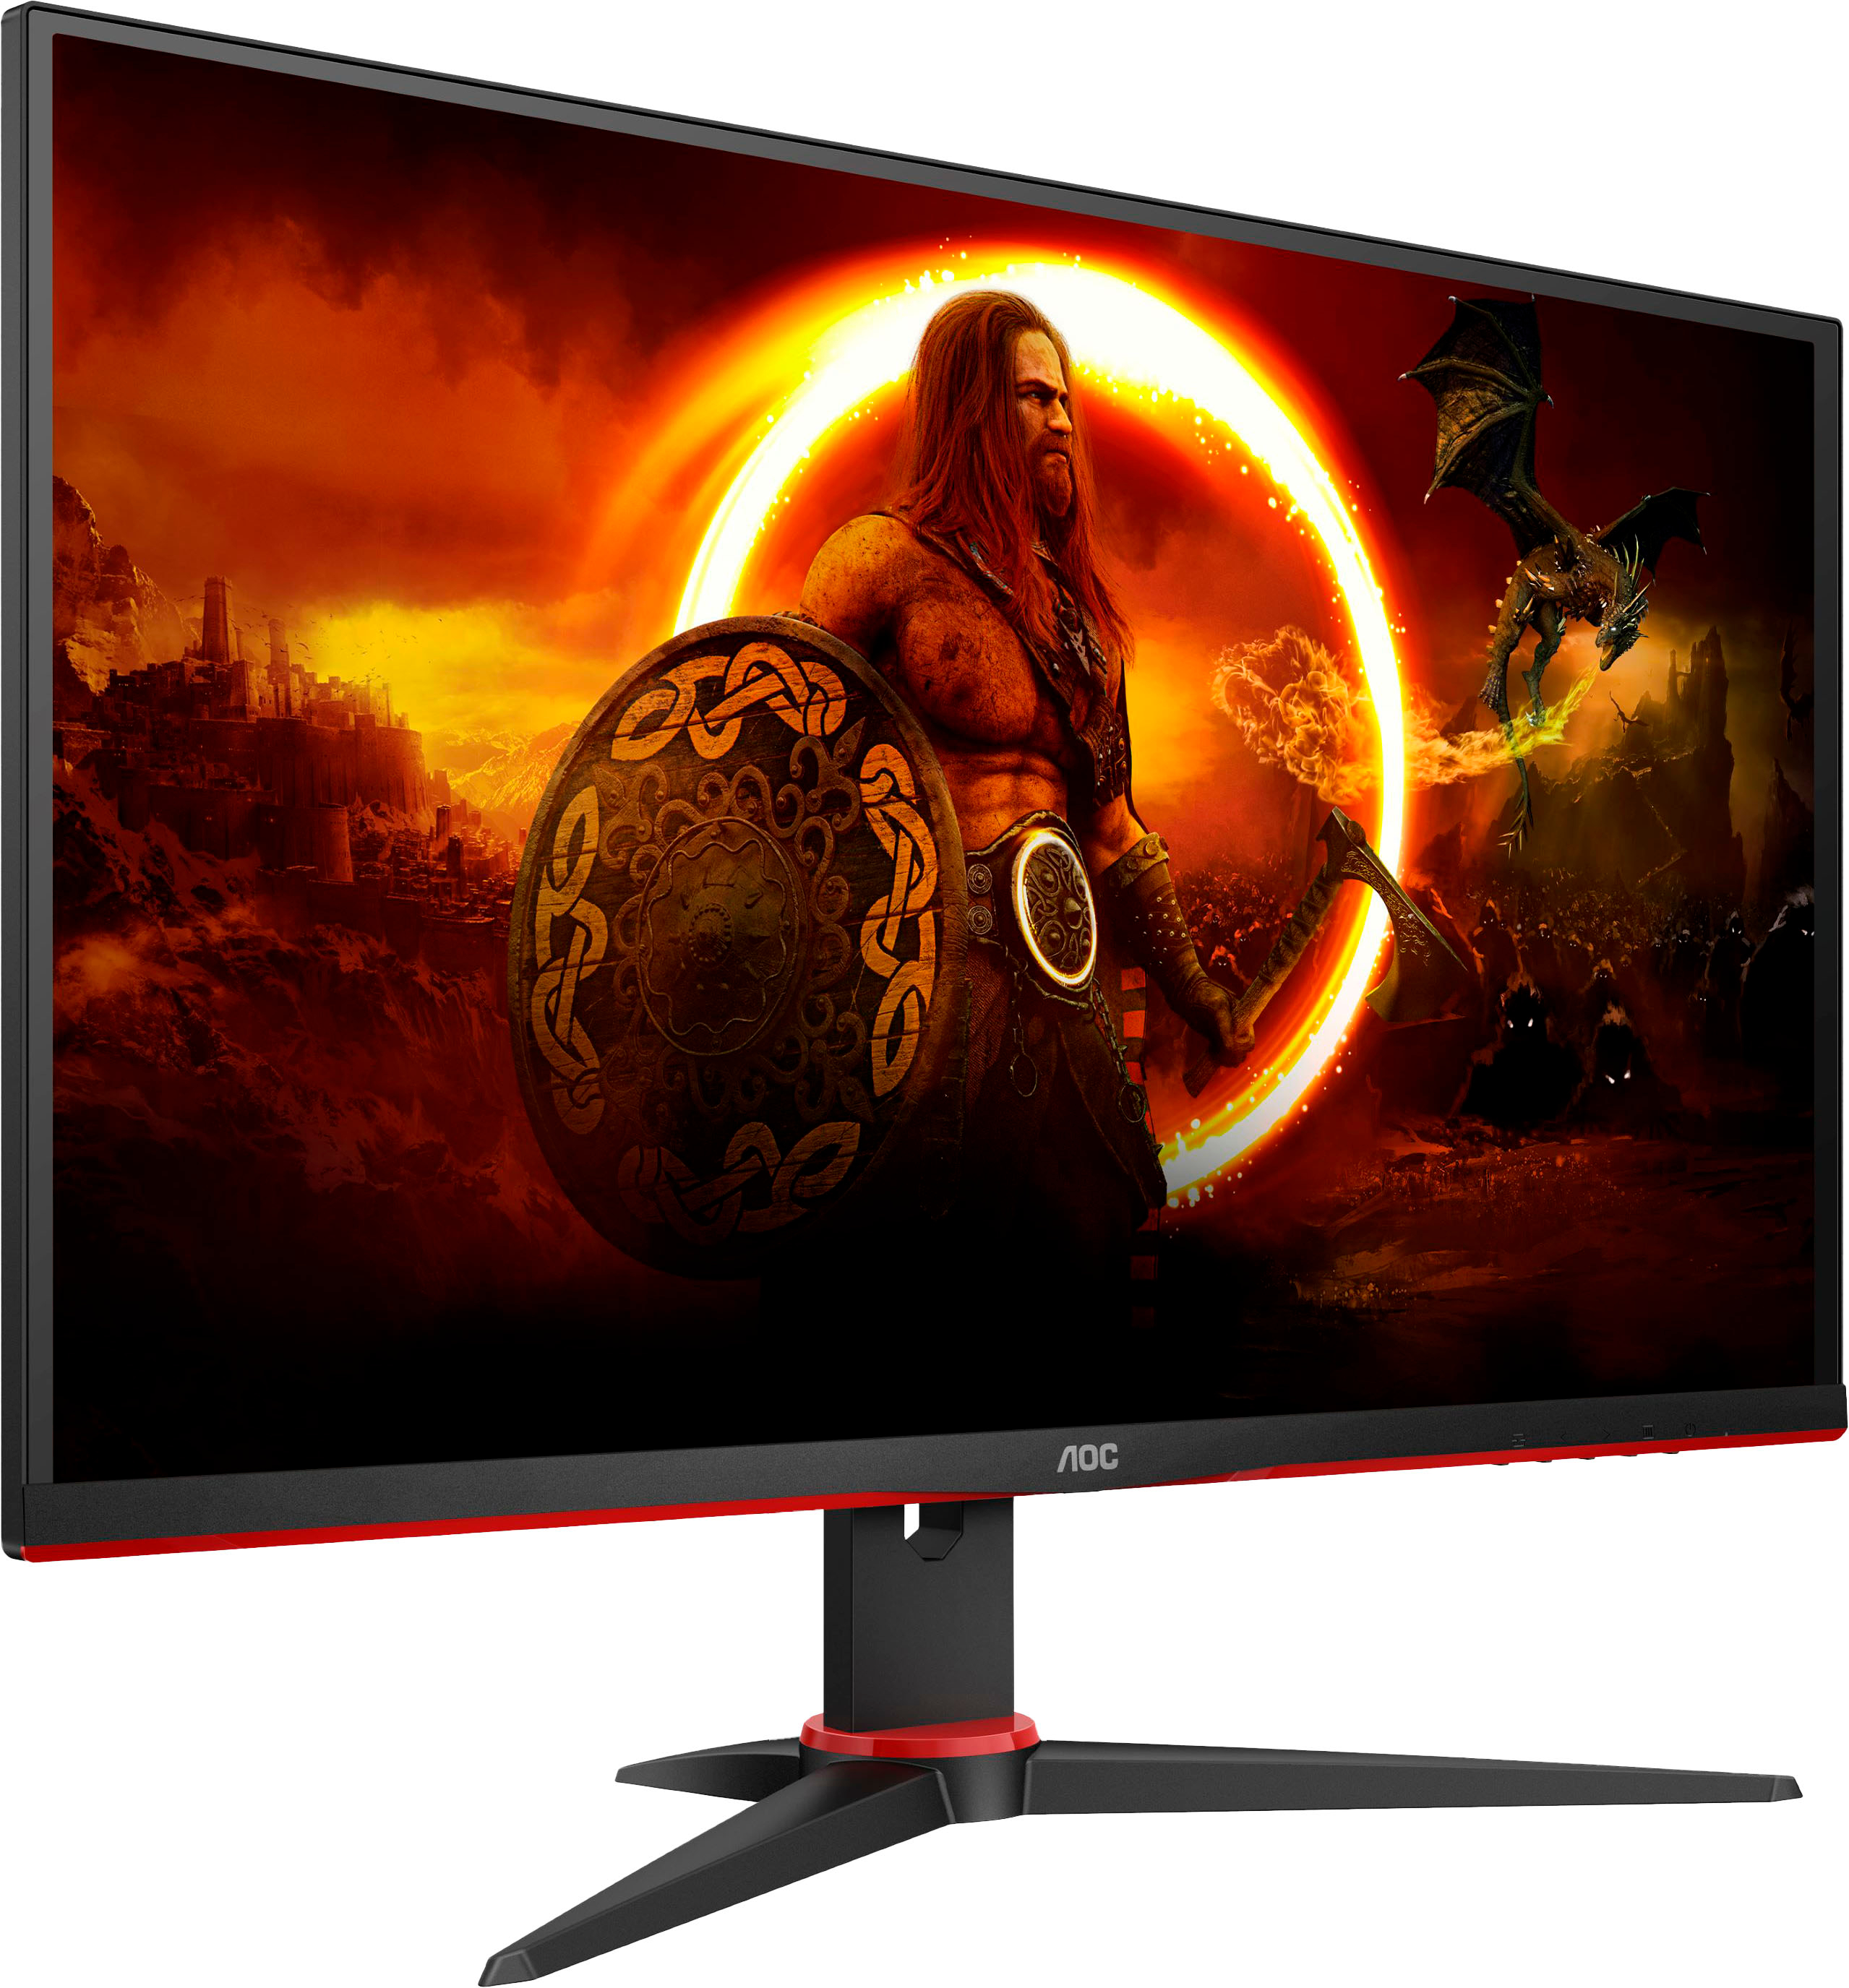 Angle View: AOC - 27G2SPE 27" LCD FHD Gaming Monitor - Black/Red